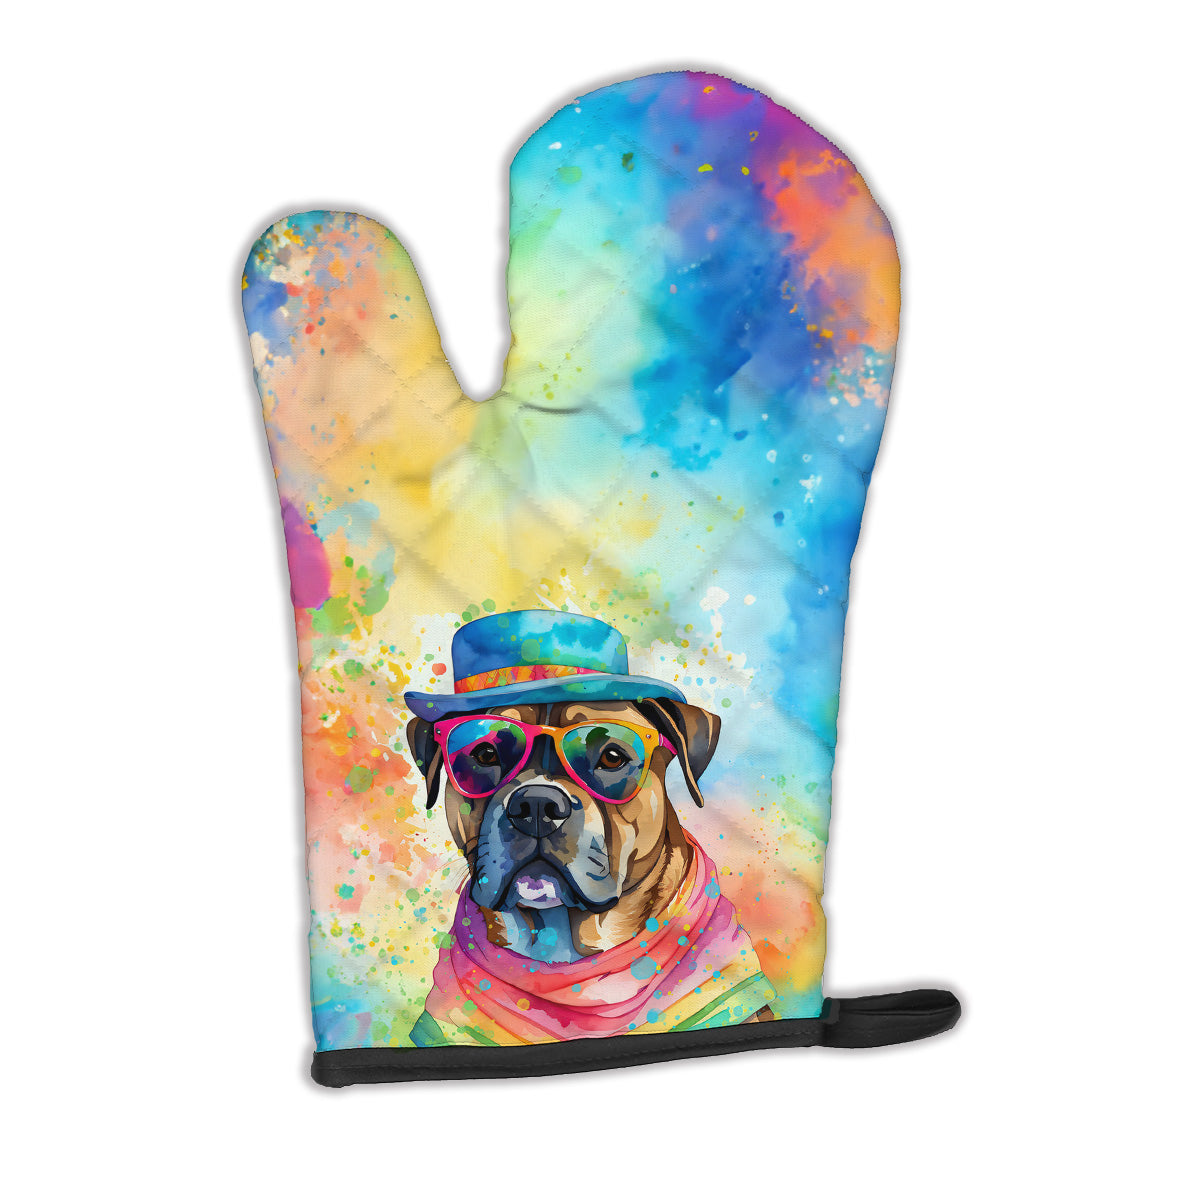 Buy this Cane Corso Hippie Dawg Oven Mitt